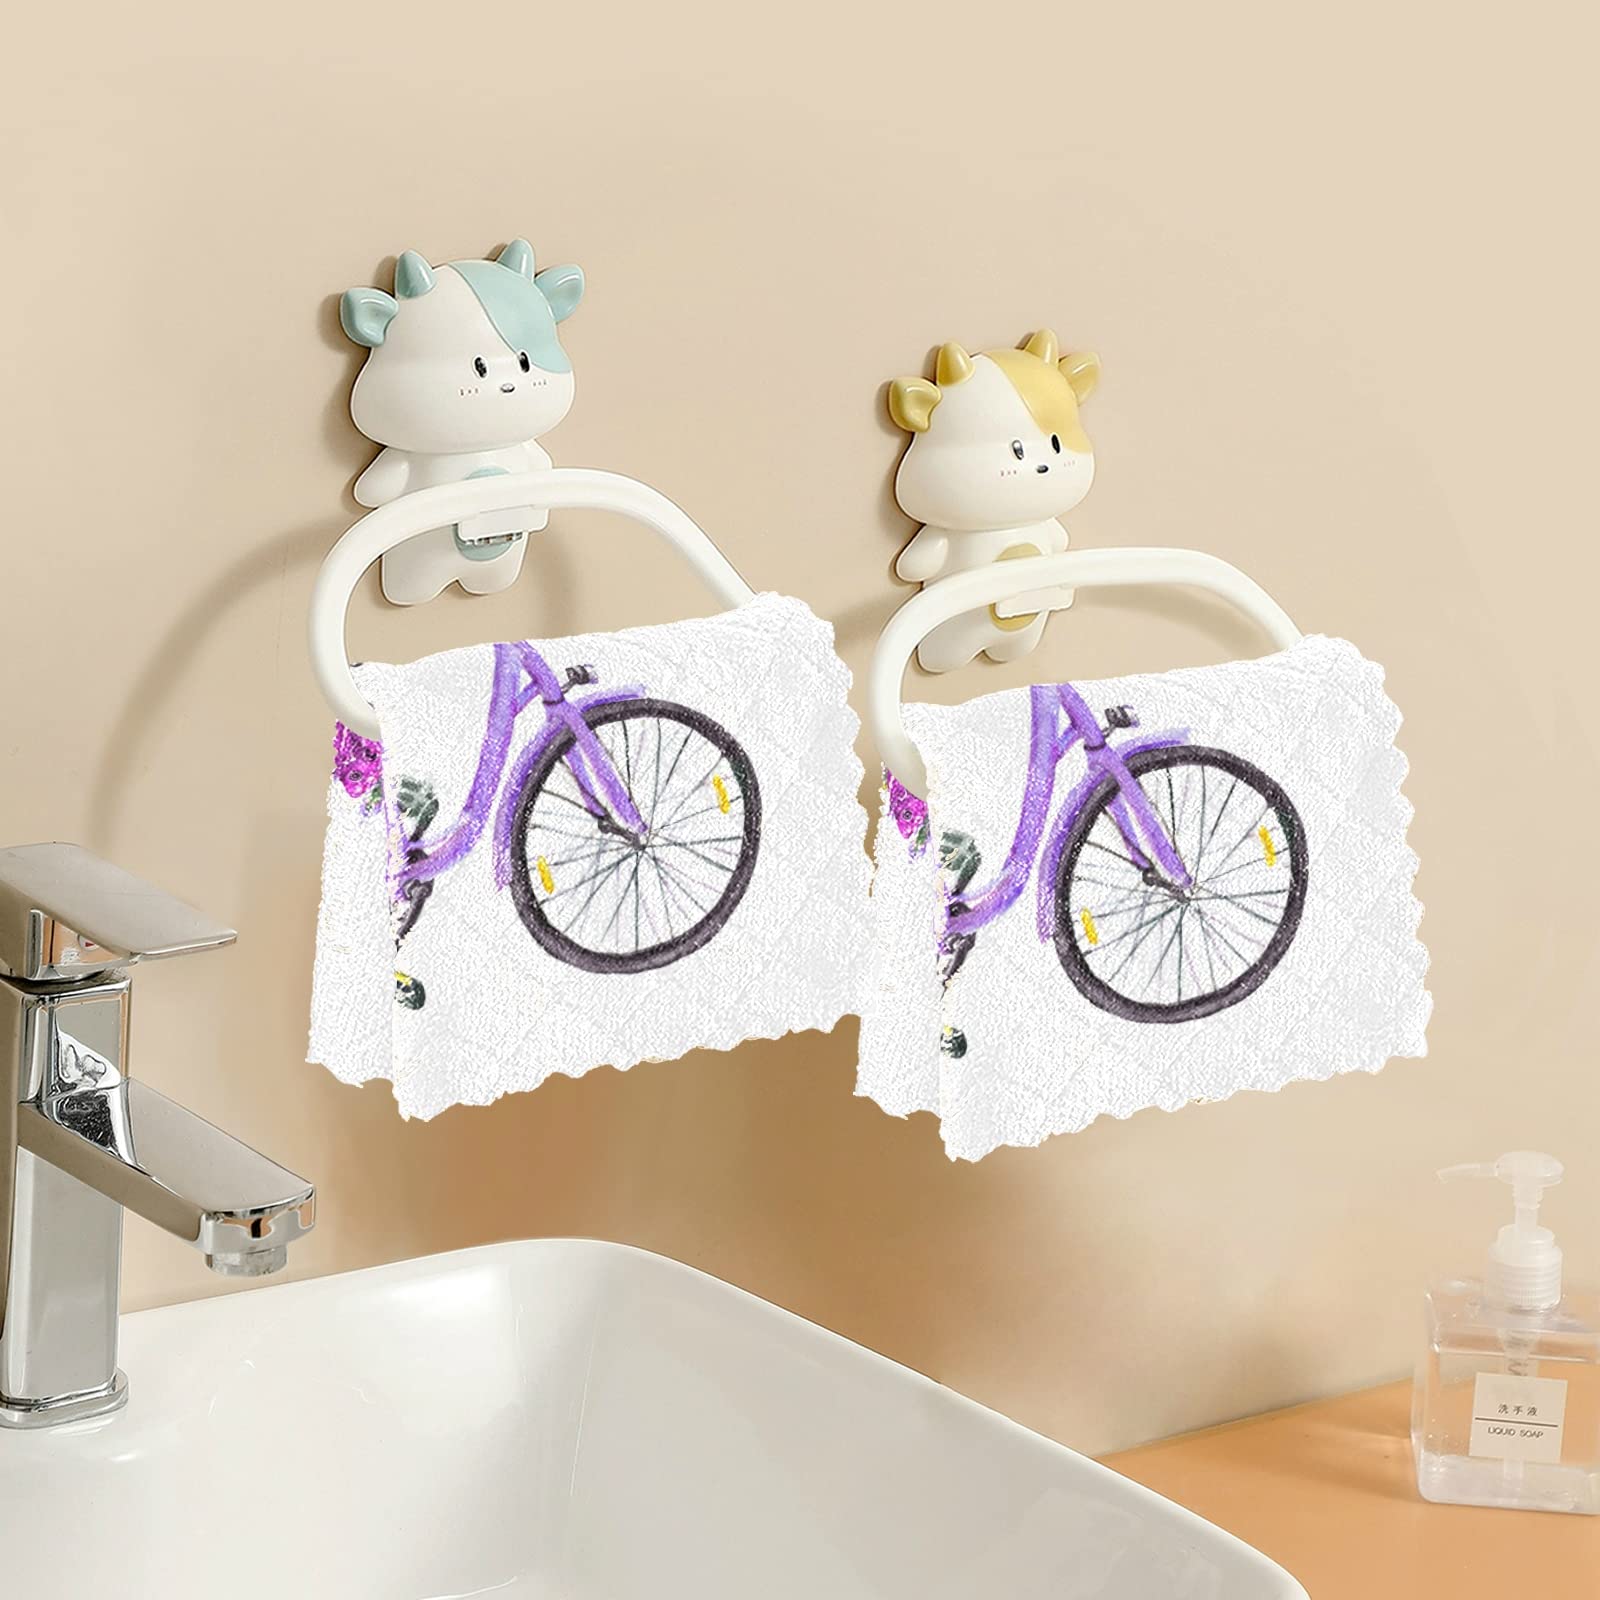 ALAZA Dish Towels Kitchen Cleaning Cloths Violet Bicycle Lavender Flower Butterflies Dish Cloths Super Absorbent Kitchen Towels Lint Free Bar Tea Soft Towel Kitchen Accessories Set of 6,11"x11"